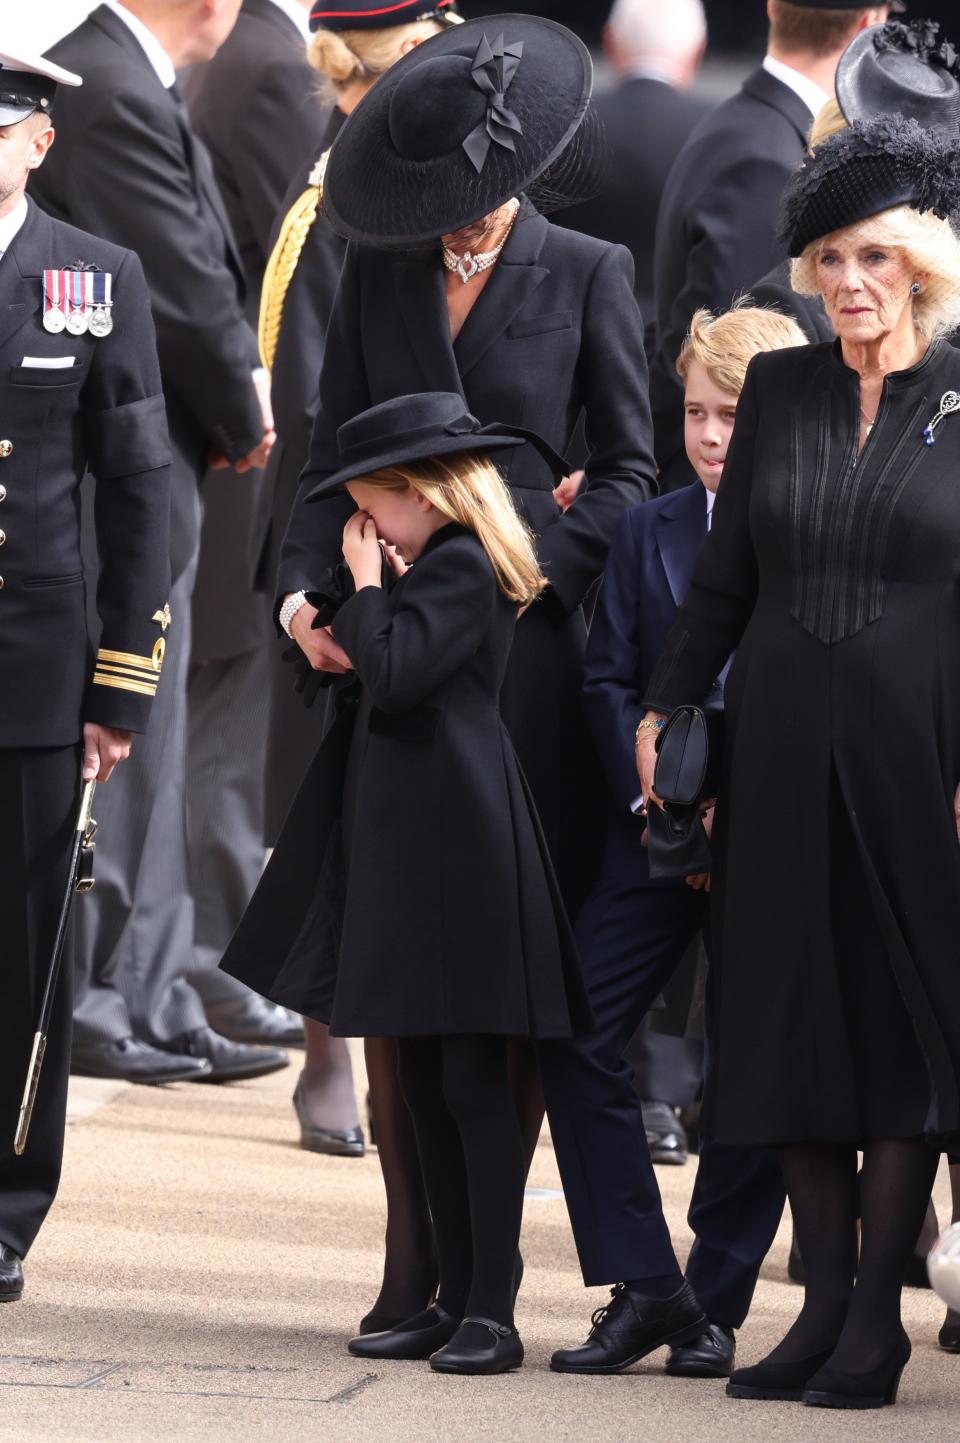 Princess Charlotte of Wales cries next to her mother, Princess Kate, brother Prince George and Queen Consort Camilla at Wellington Arch after the State Funeral of Queen Elizabeth II on Sept. 19, 2022.